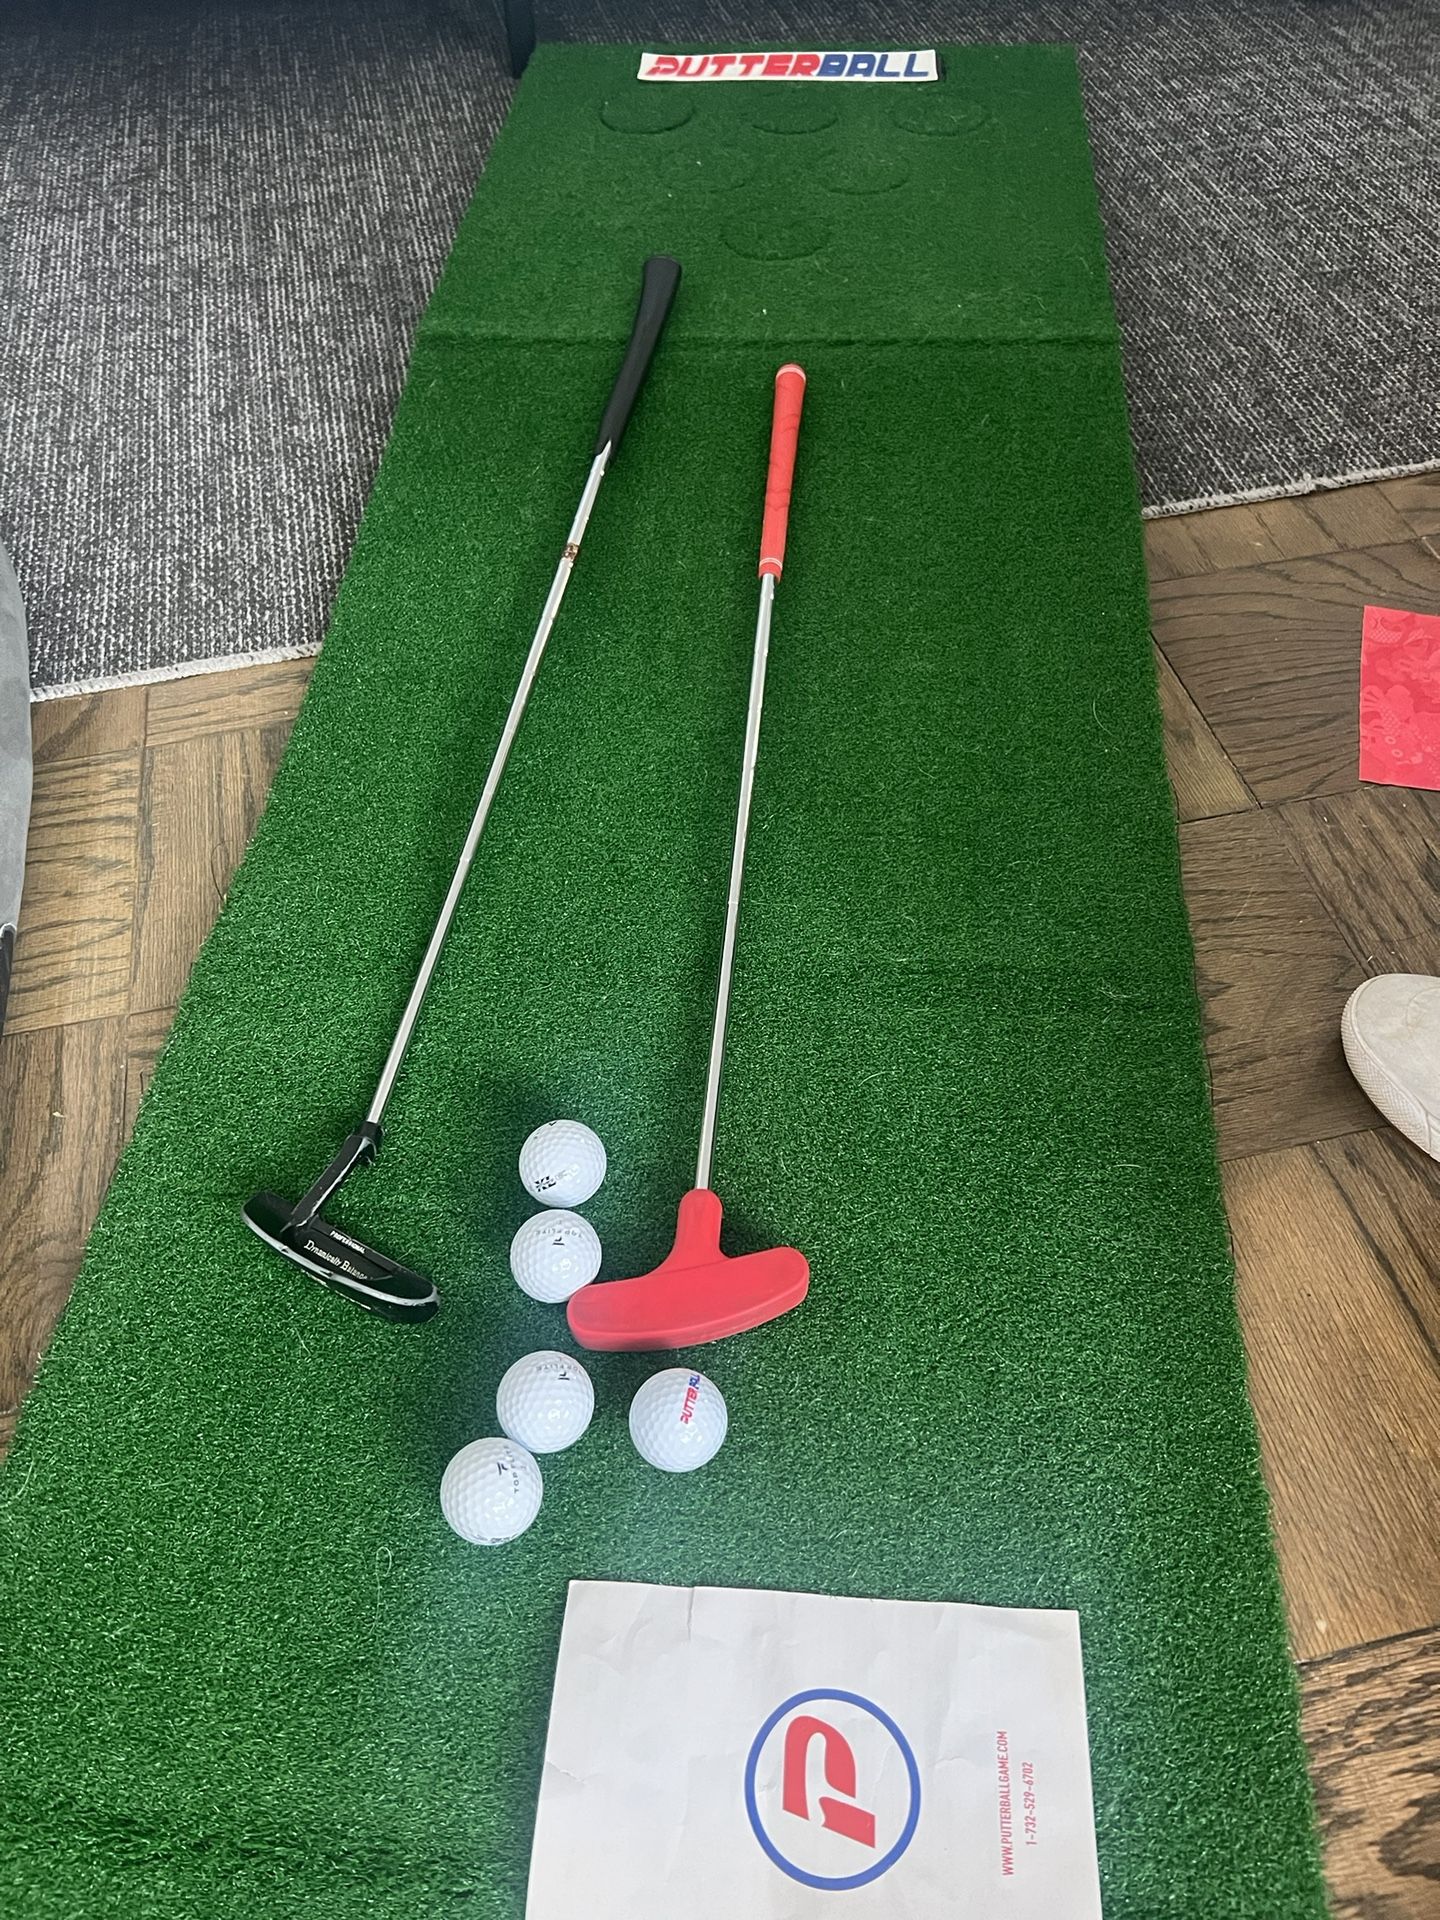 Putterball Golf game